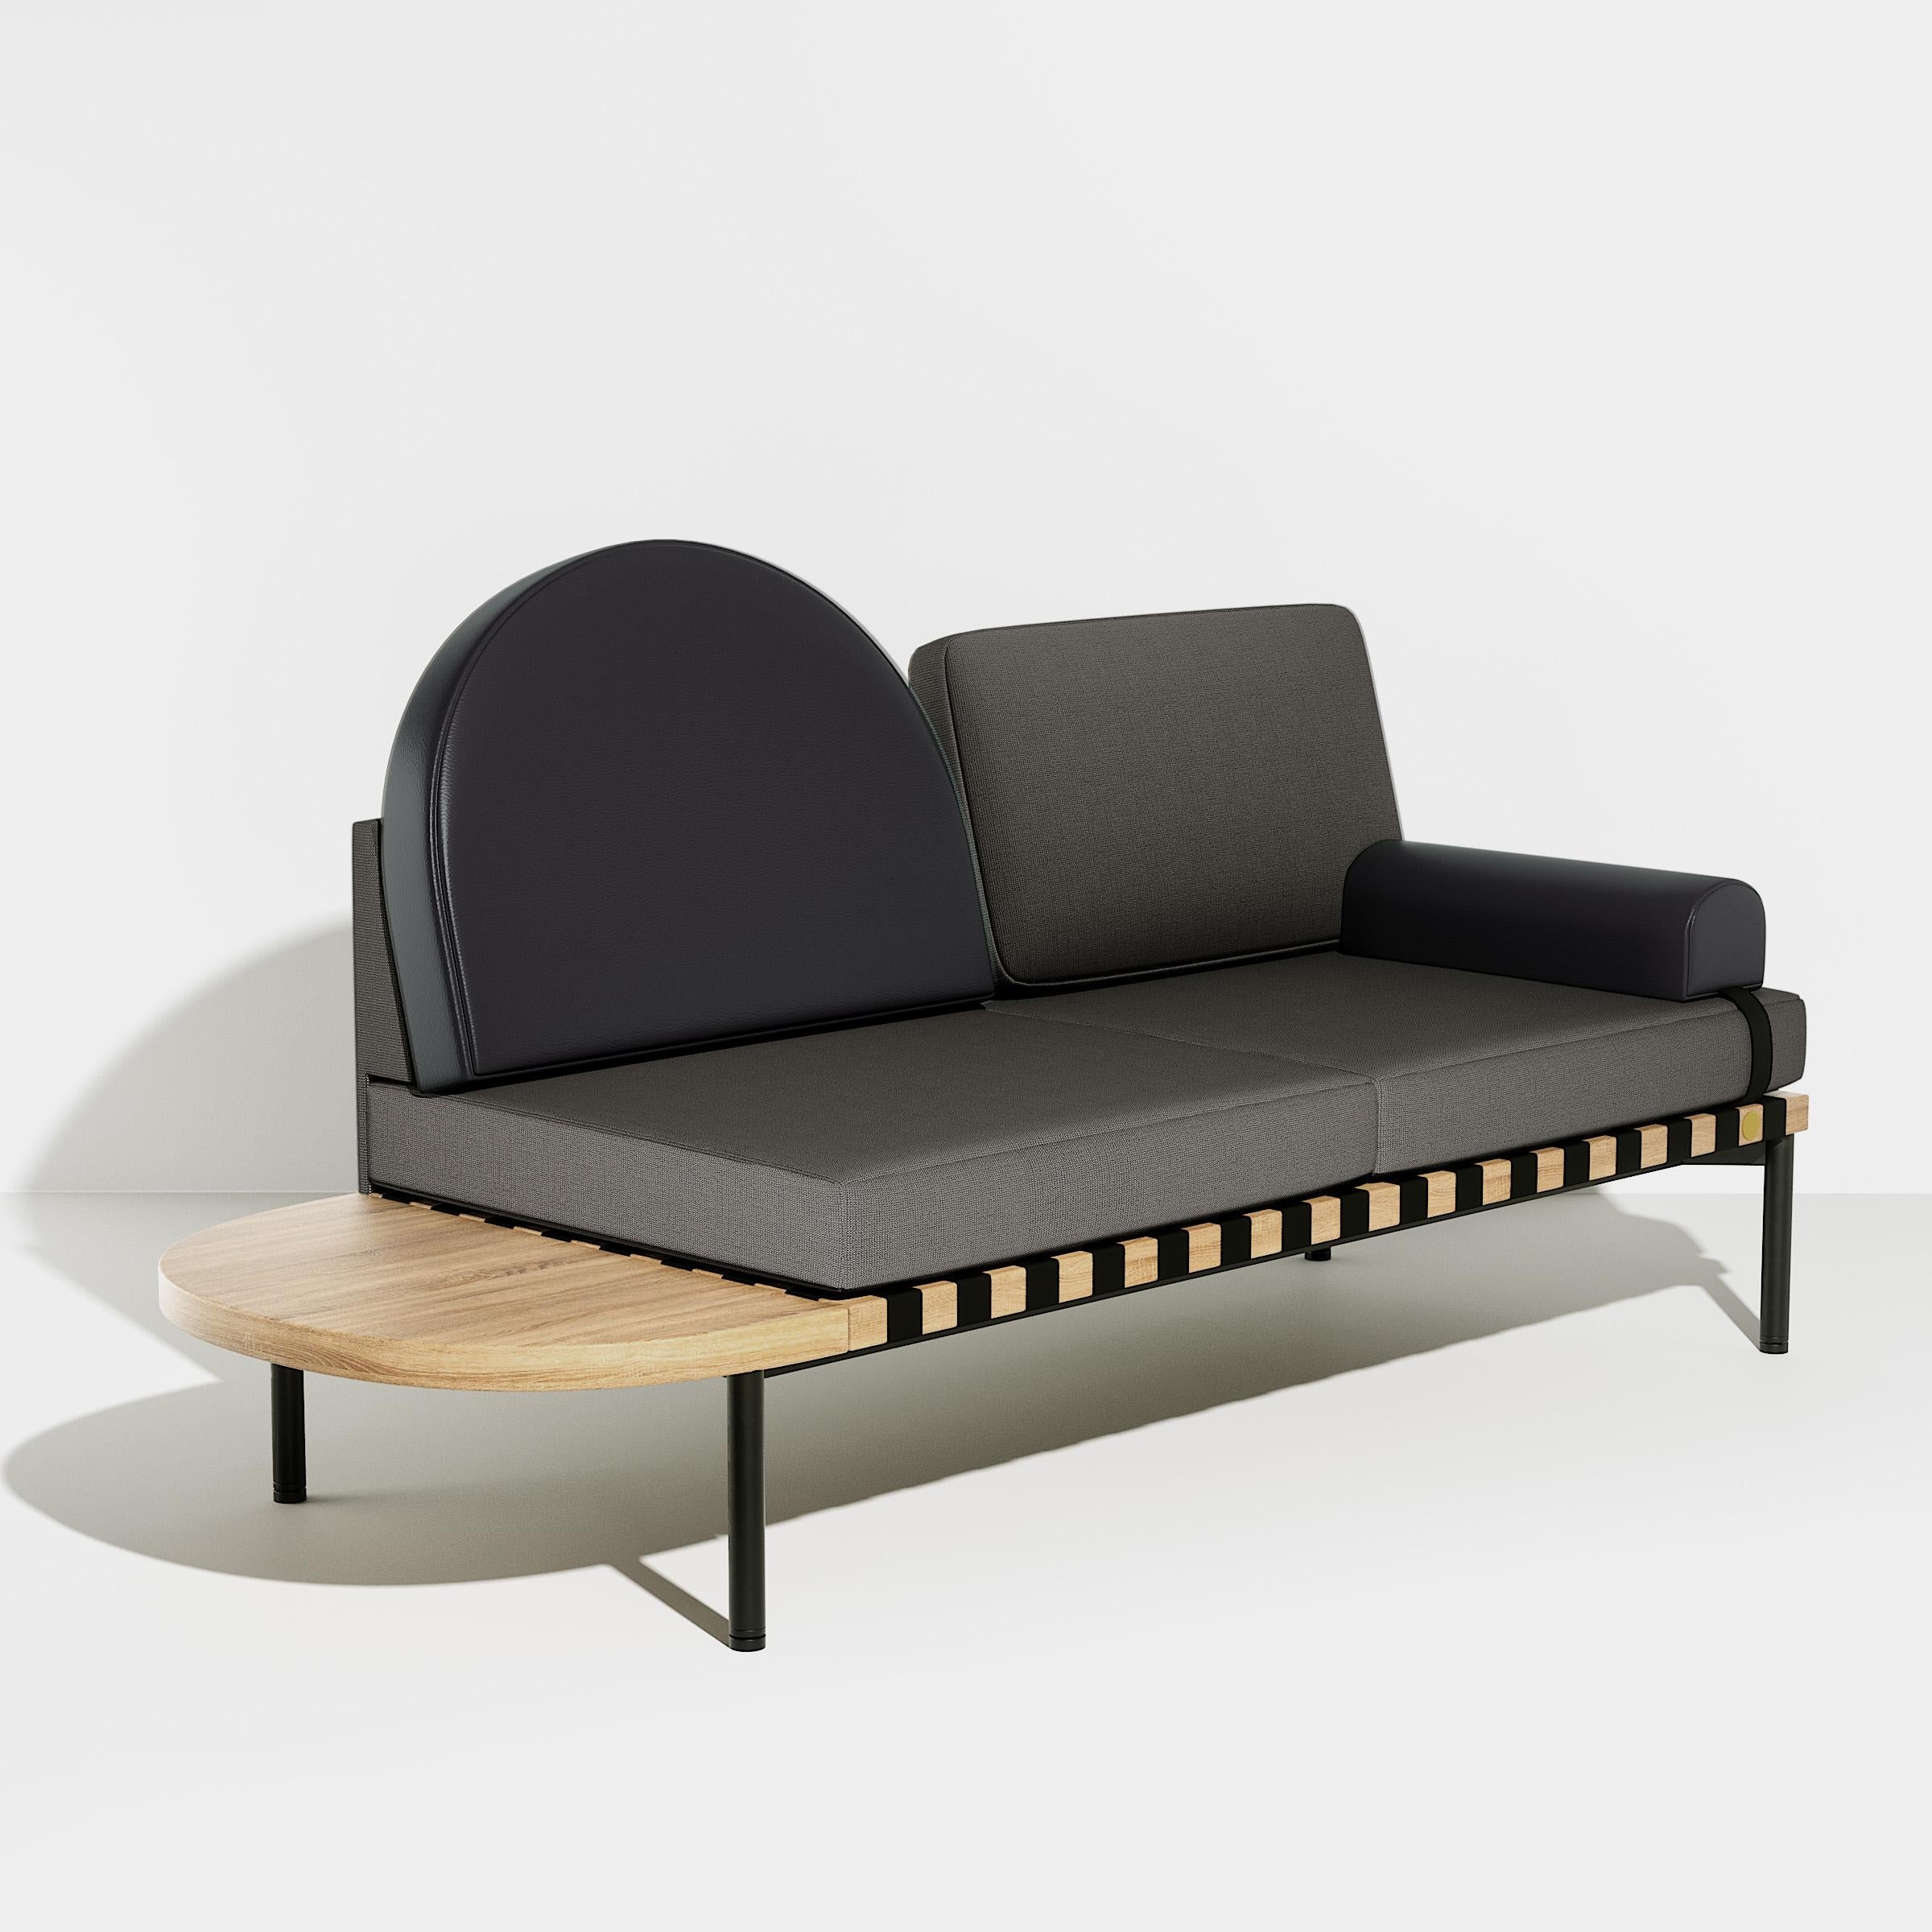 Petite Friture Grid Daybed in Grey-black Upholstery by Studio Pool, 2015

Pool designed the Grid collection in reference to the Bauhaus style and in honour of the graphic talents. Each element of this all-modular system retains the identity of the